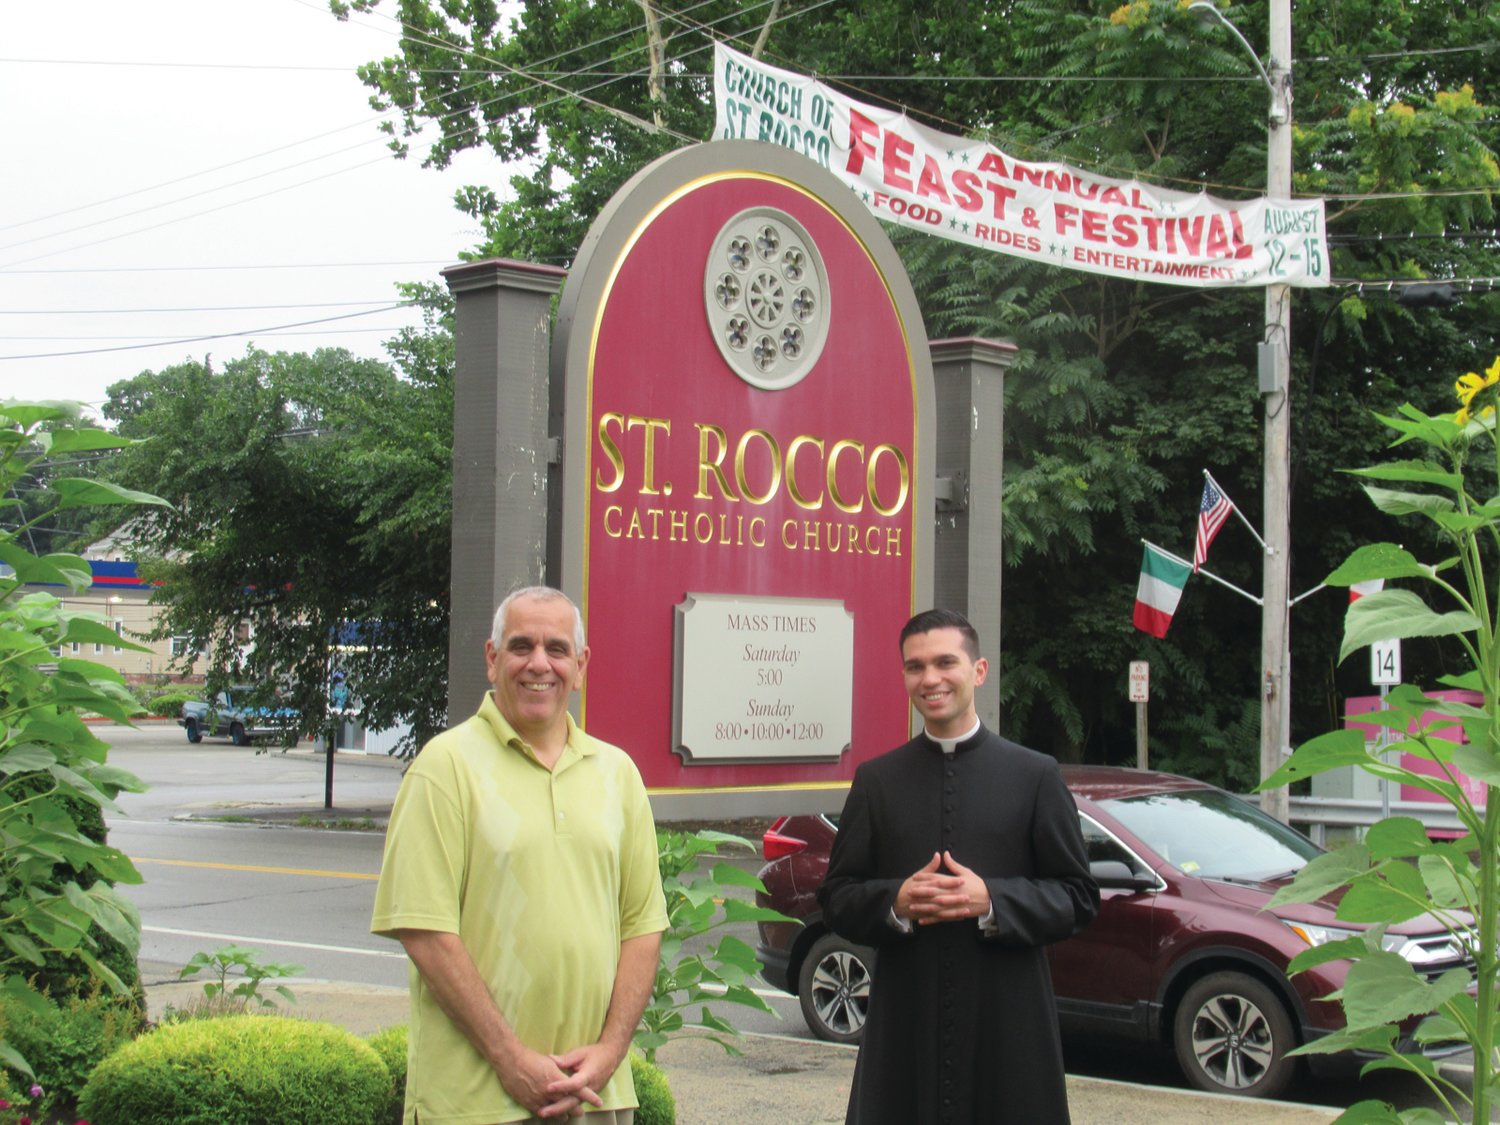 DIVINE DUTY: Richard Montella (left), long-serving co-chairman of the now 81-year-old Saint Rocco’s Fest and Festival, is joined by Seminarian Stephan Coutcher outside the Roman Catholic Church conveniently located on the corner of Plainfield Pike and Atwood Avenue in Johnston.